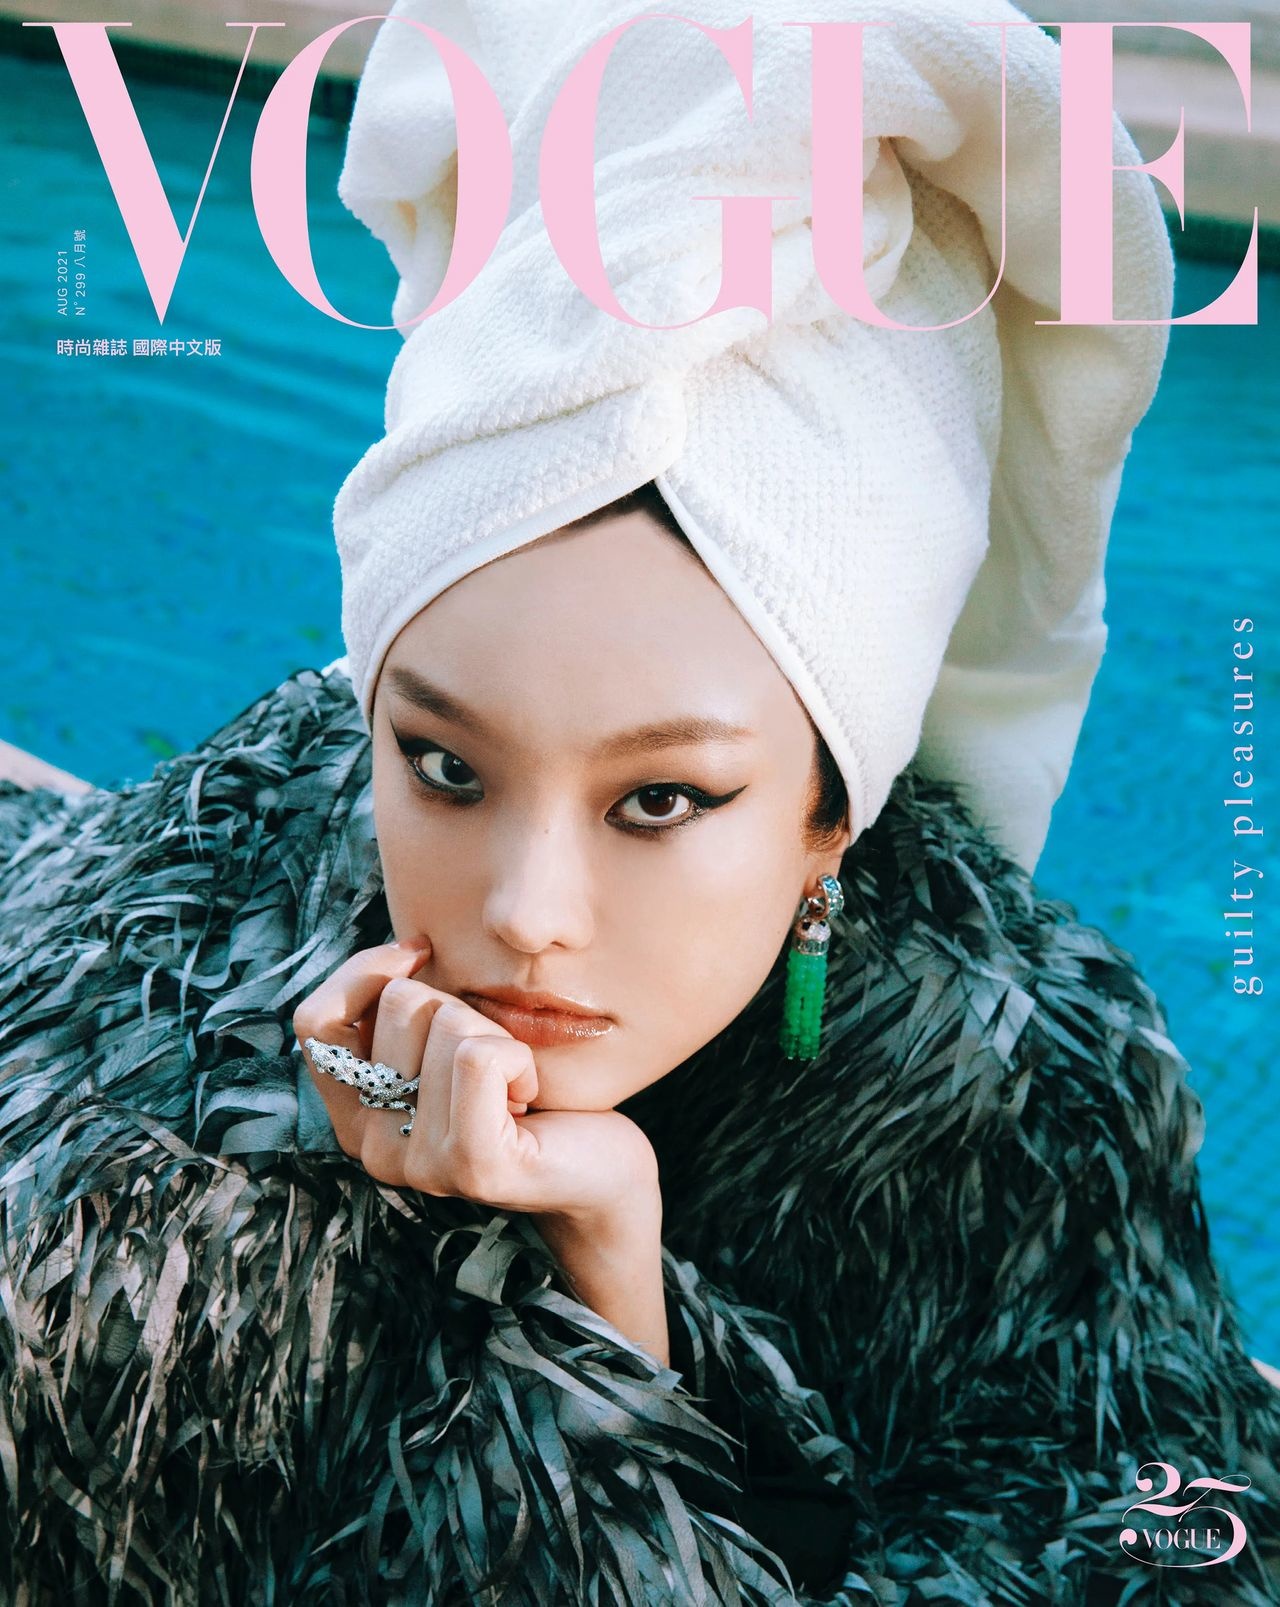 Vogue Taiwan August 2021 Cover Story Editorial